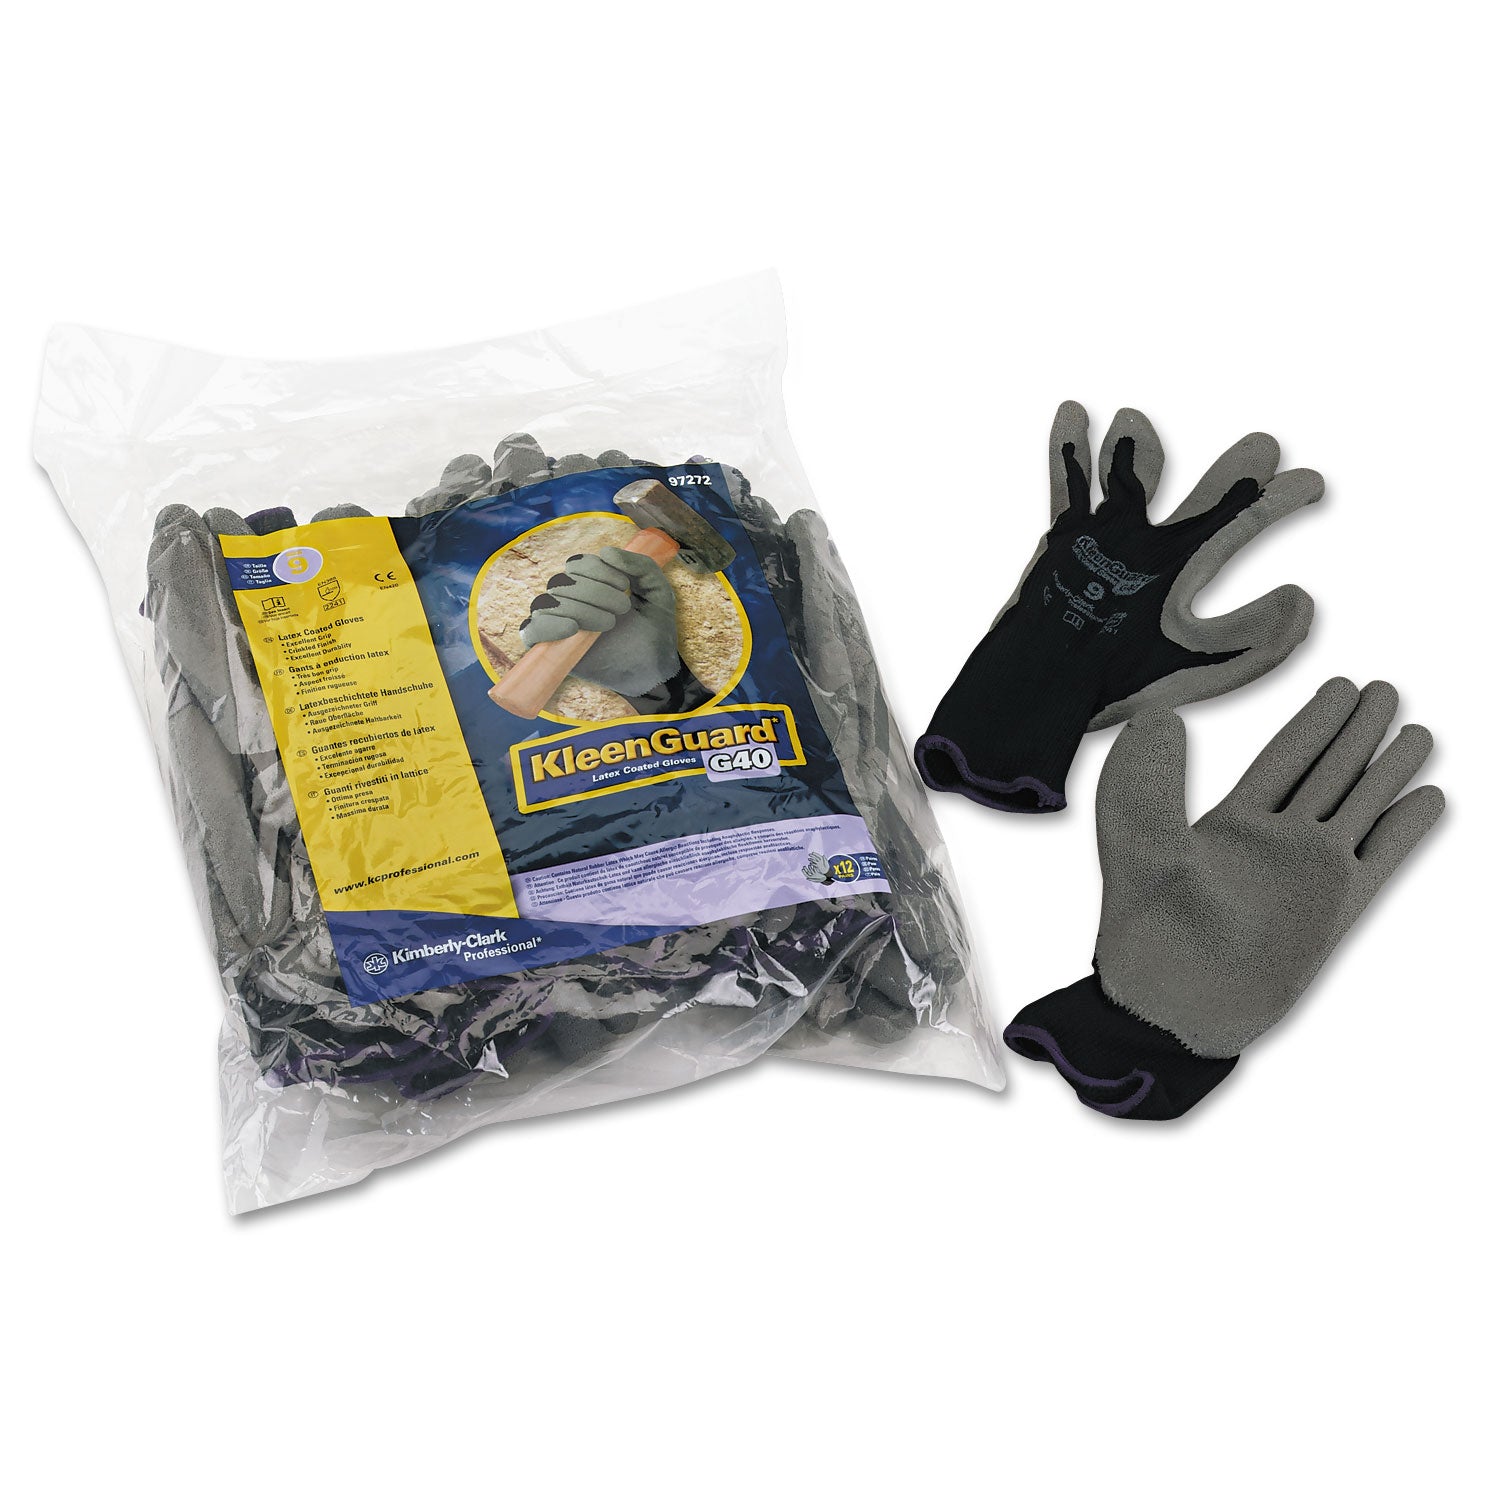 g40-latex-coated-poly-cotton-gloves-250-mm-length-large-size-9-gray-12-pairs_kcc97272 - 2